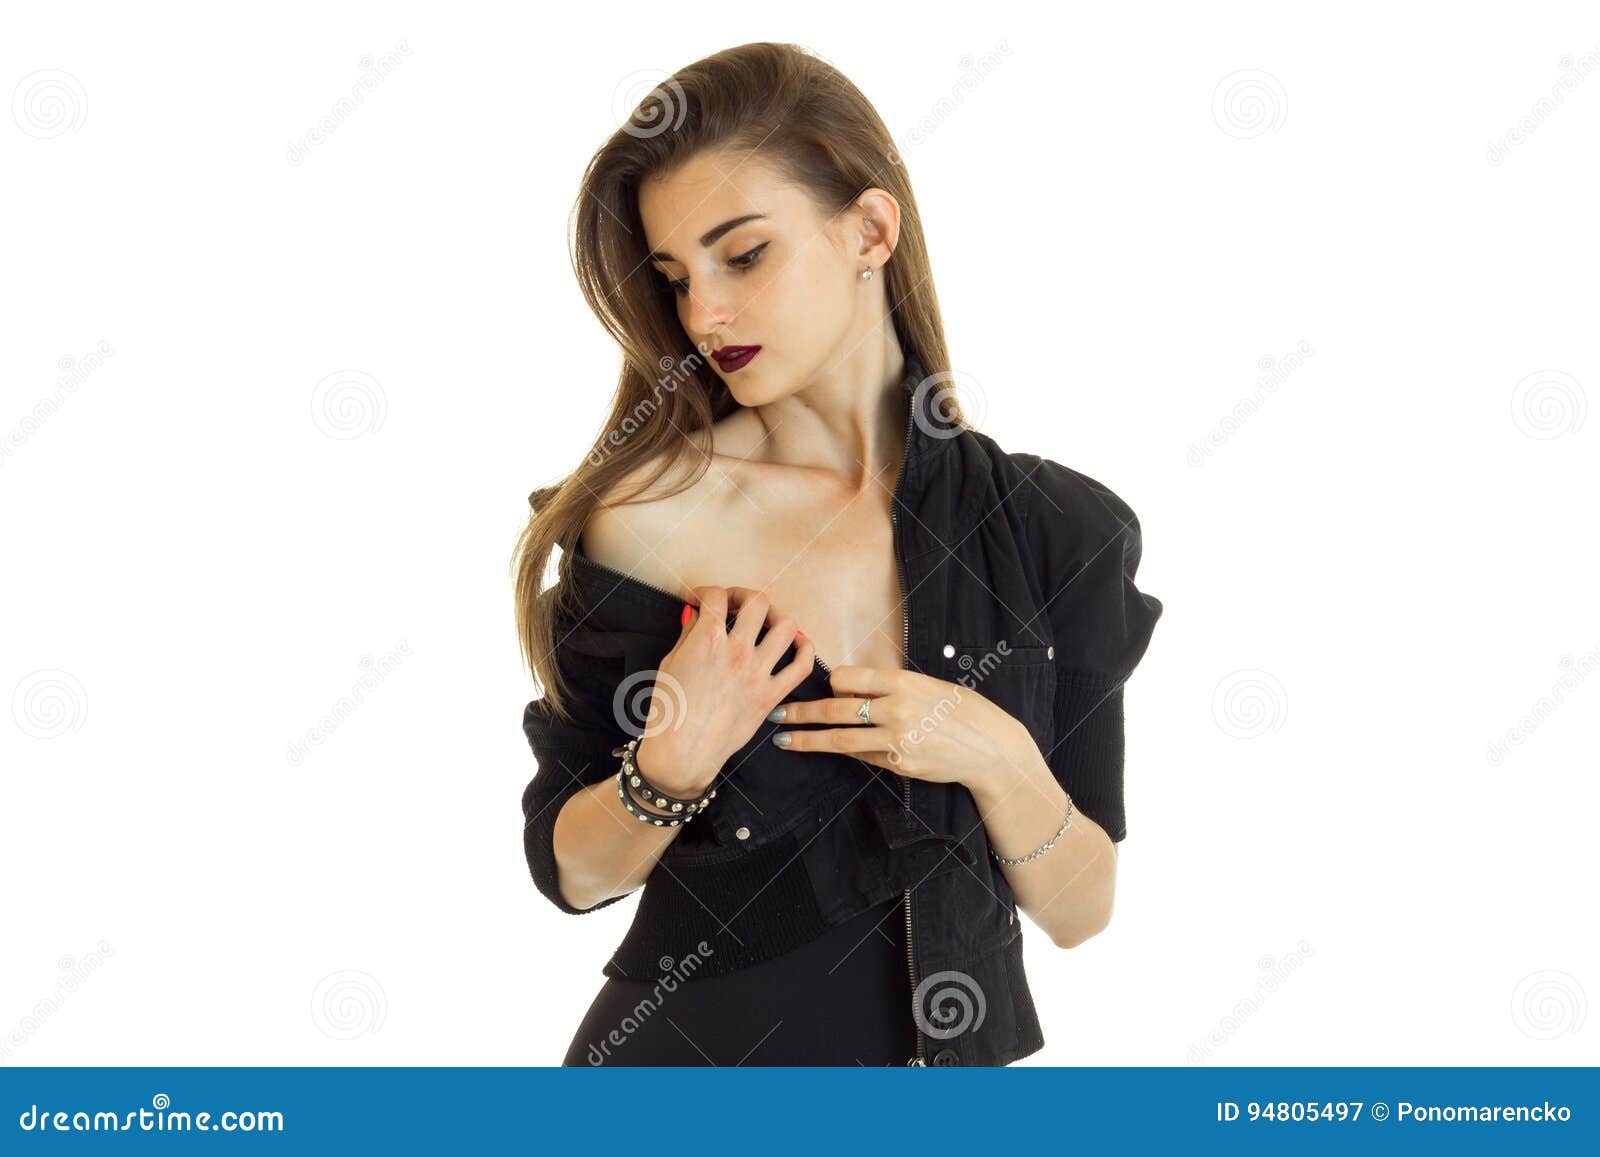 Young Woman in Black Jacket without Bra Looking Down Stock Image